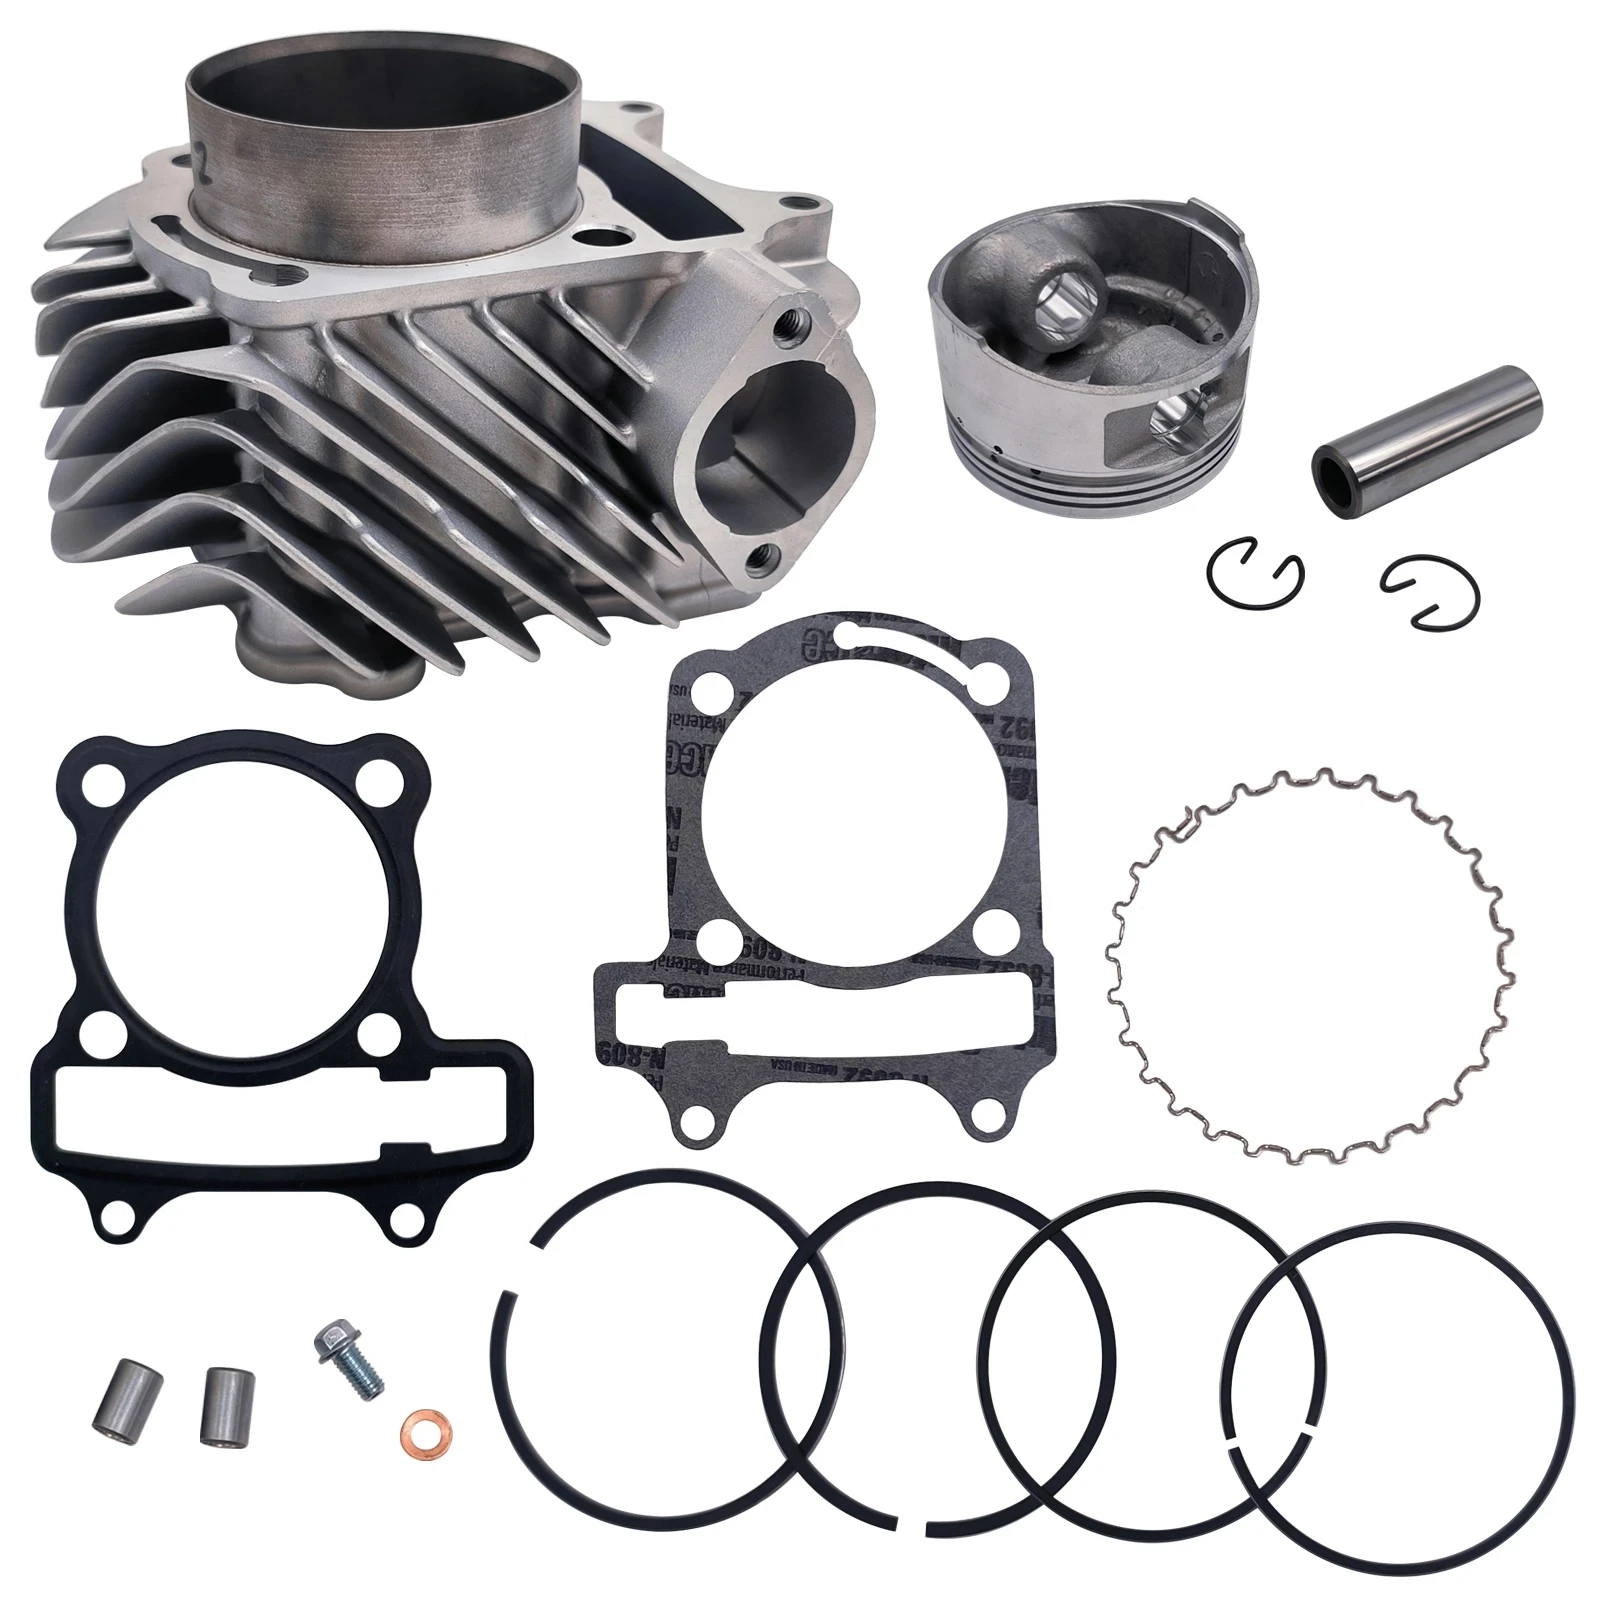 Cylinder Kit 200cc for Linhai 200 Chinese Scooter ATV Trike Buggy